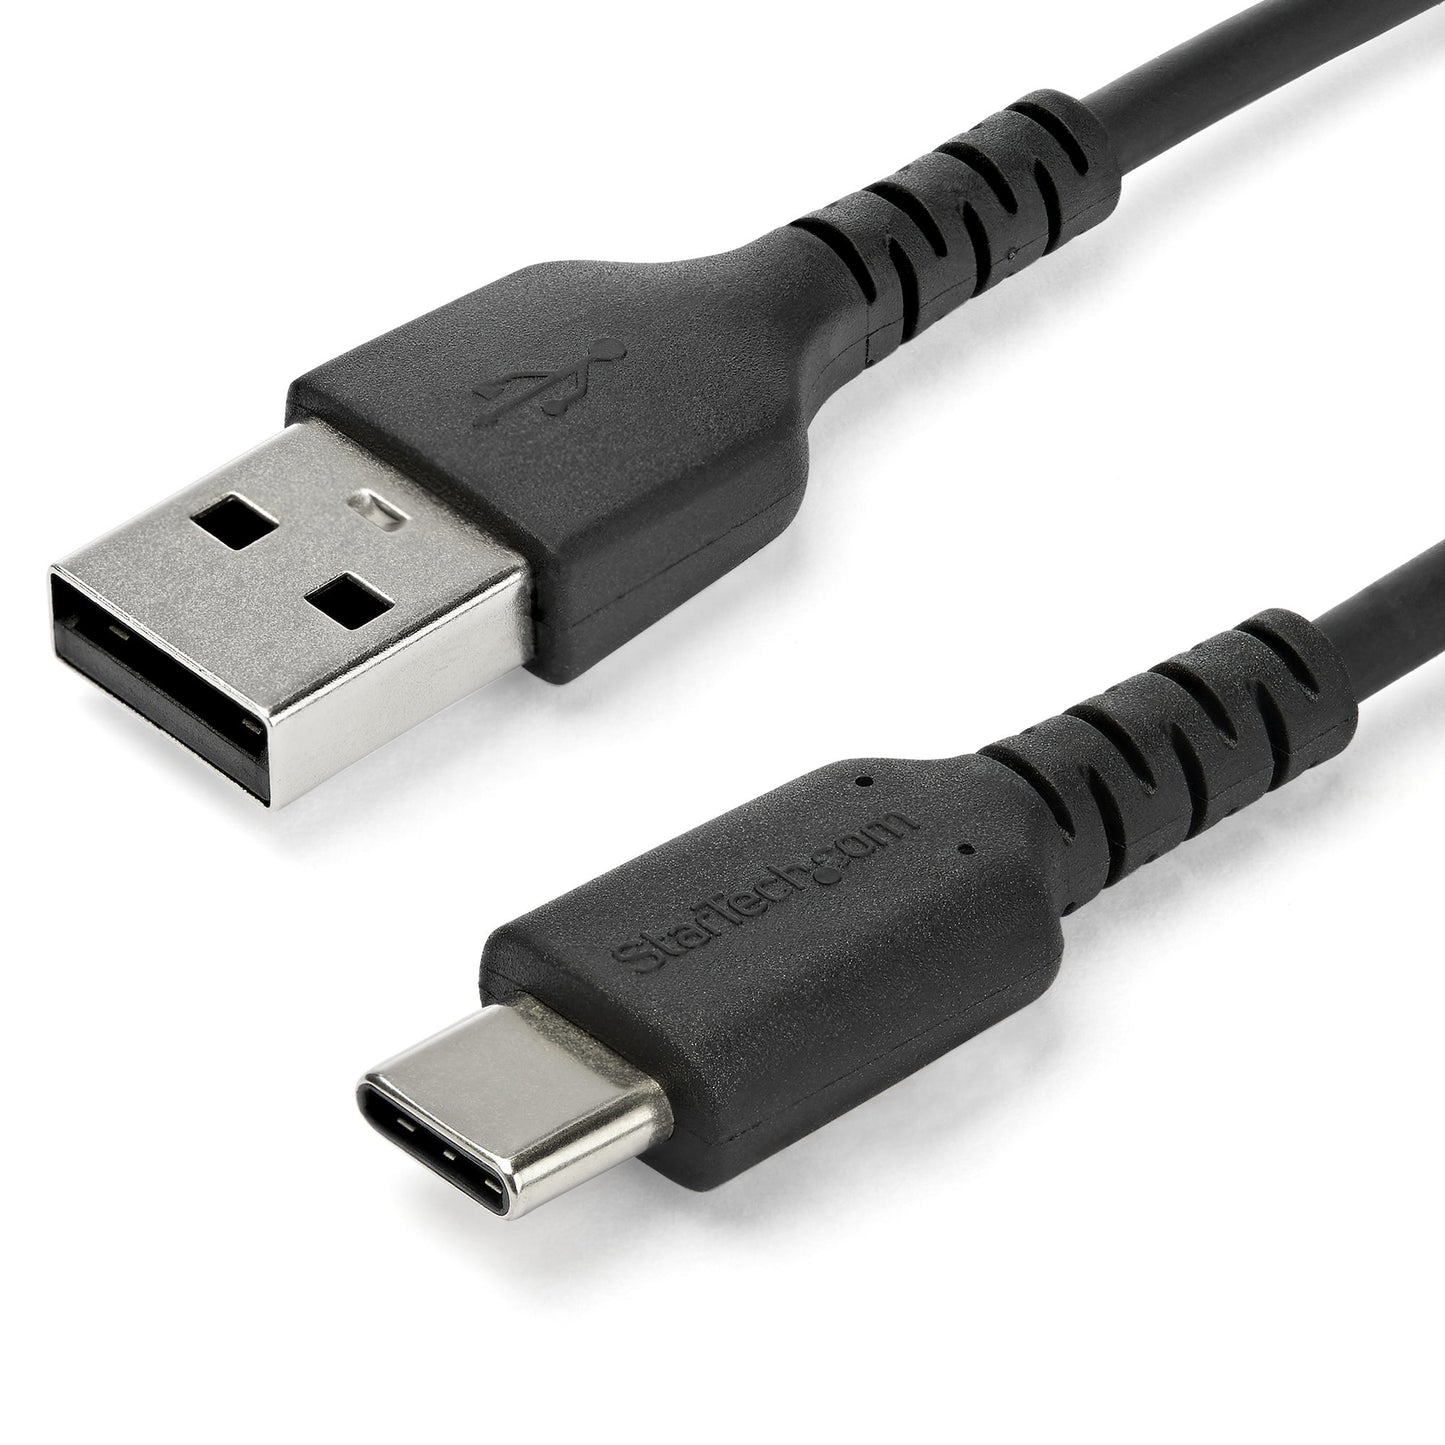 StarTech.com 2m USB A to USB C Charging Cable - Durable Fast Charge & Sync USB 2.0 to USB Type C Data Cord - Rugged TPE Jacket Aramid Fiber M/M 3A Black - Samsung S10, iPad Pro, Pixel-0